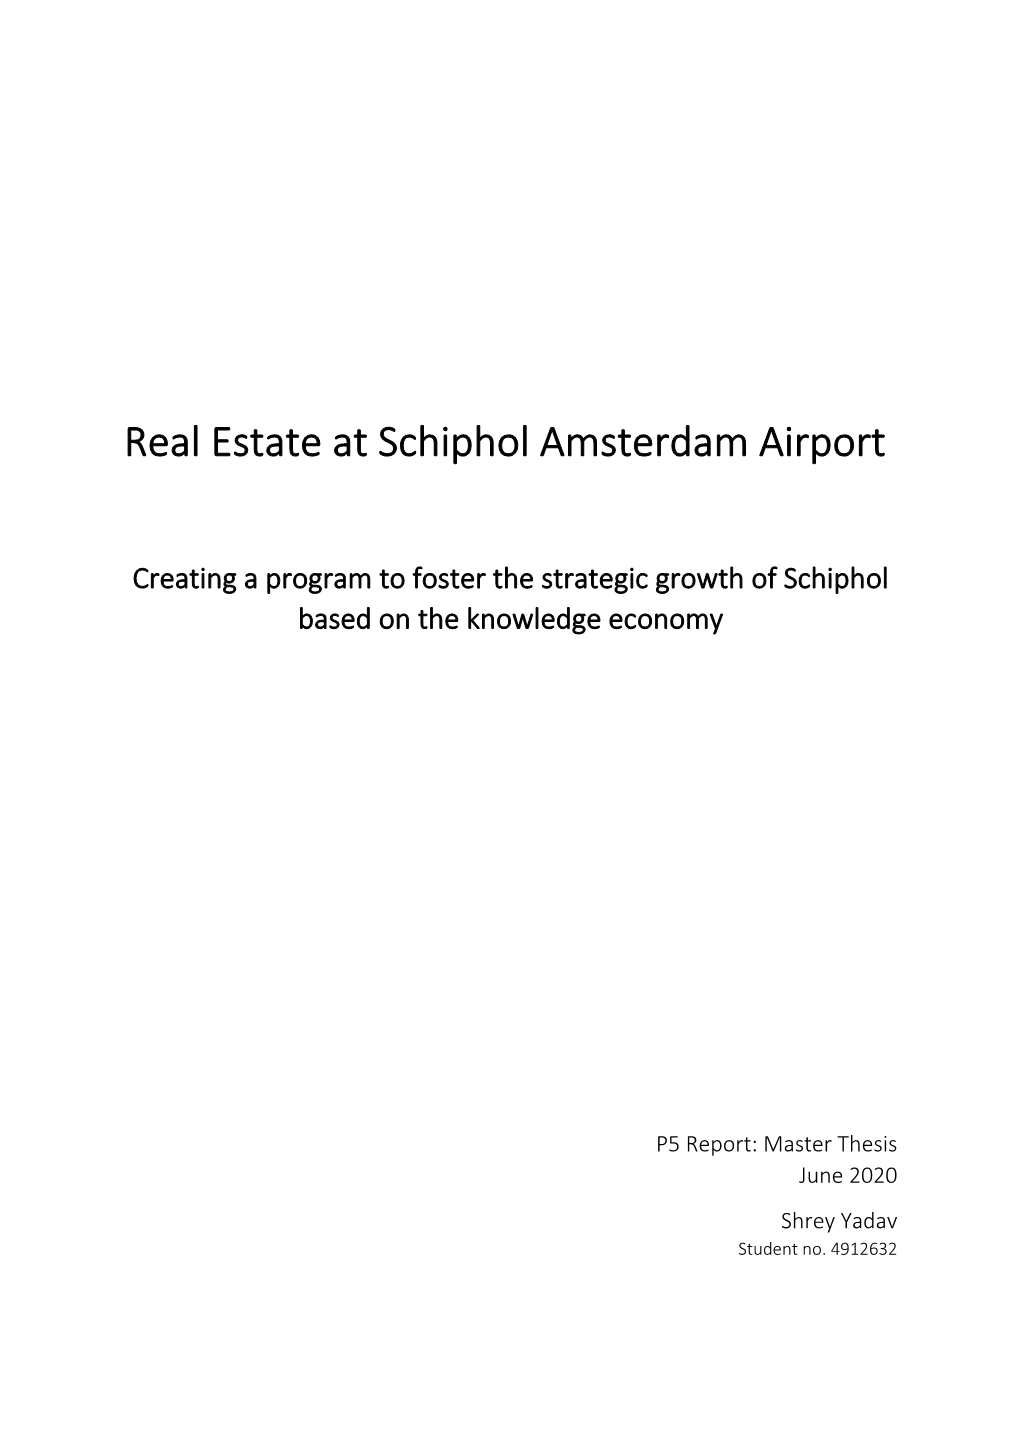 Real Estate at Schiphol Amsterdam Airport